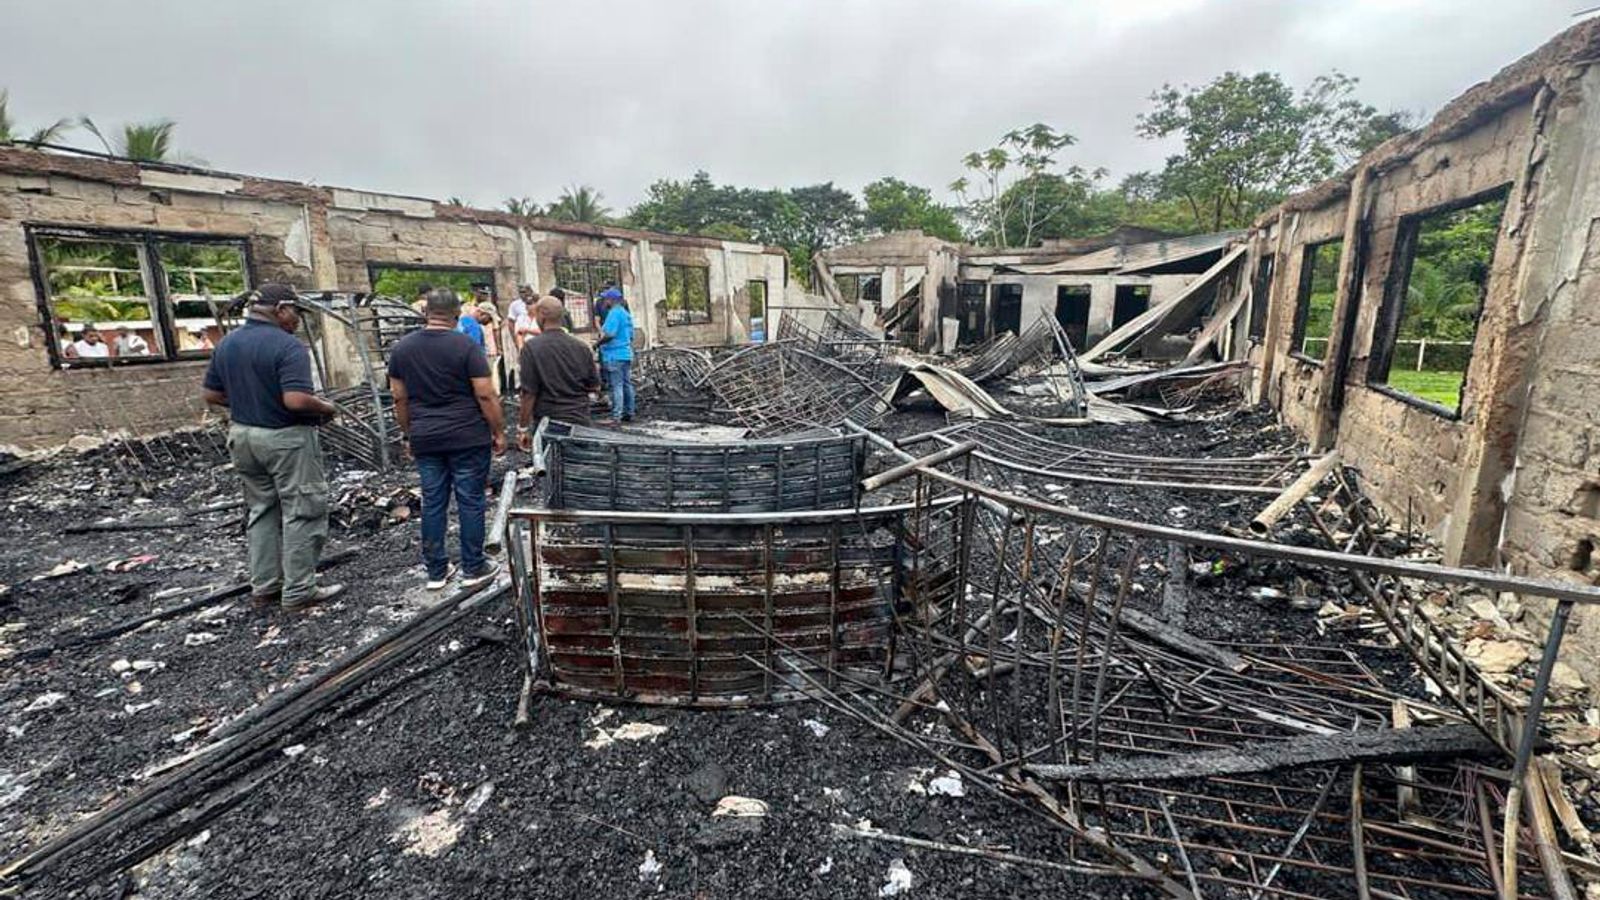 Guyana school dormitory fire deliberately set by student upset her phone was confiscated, says official